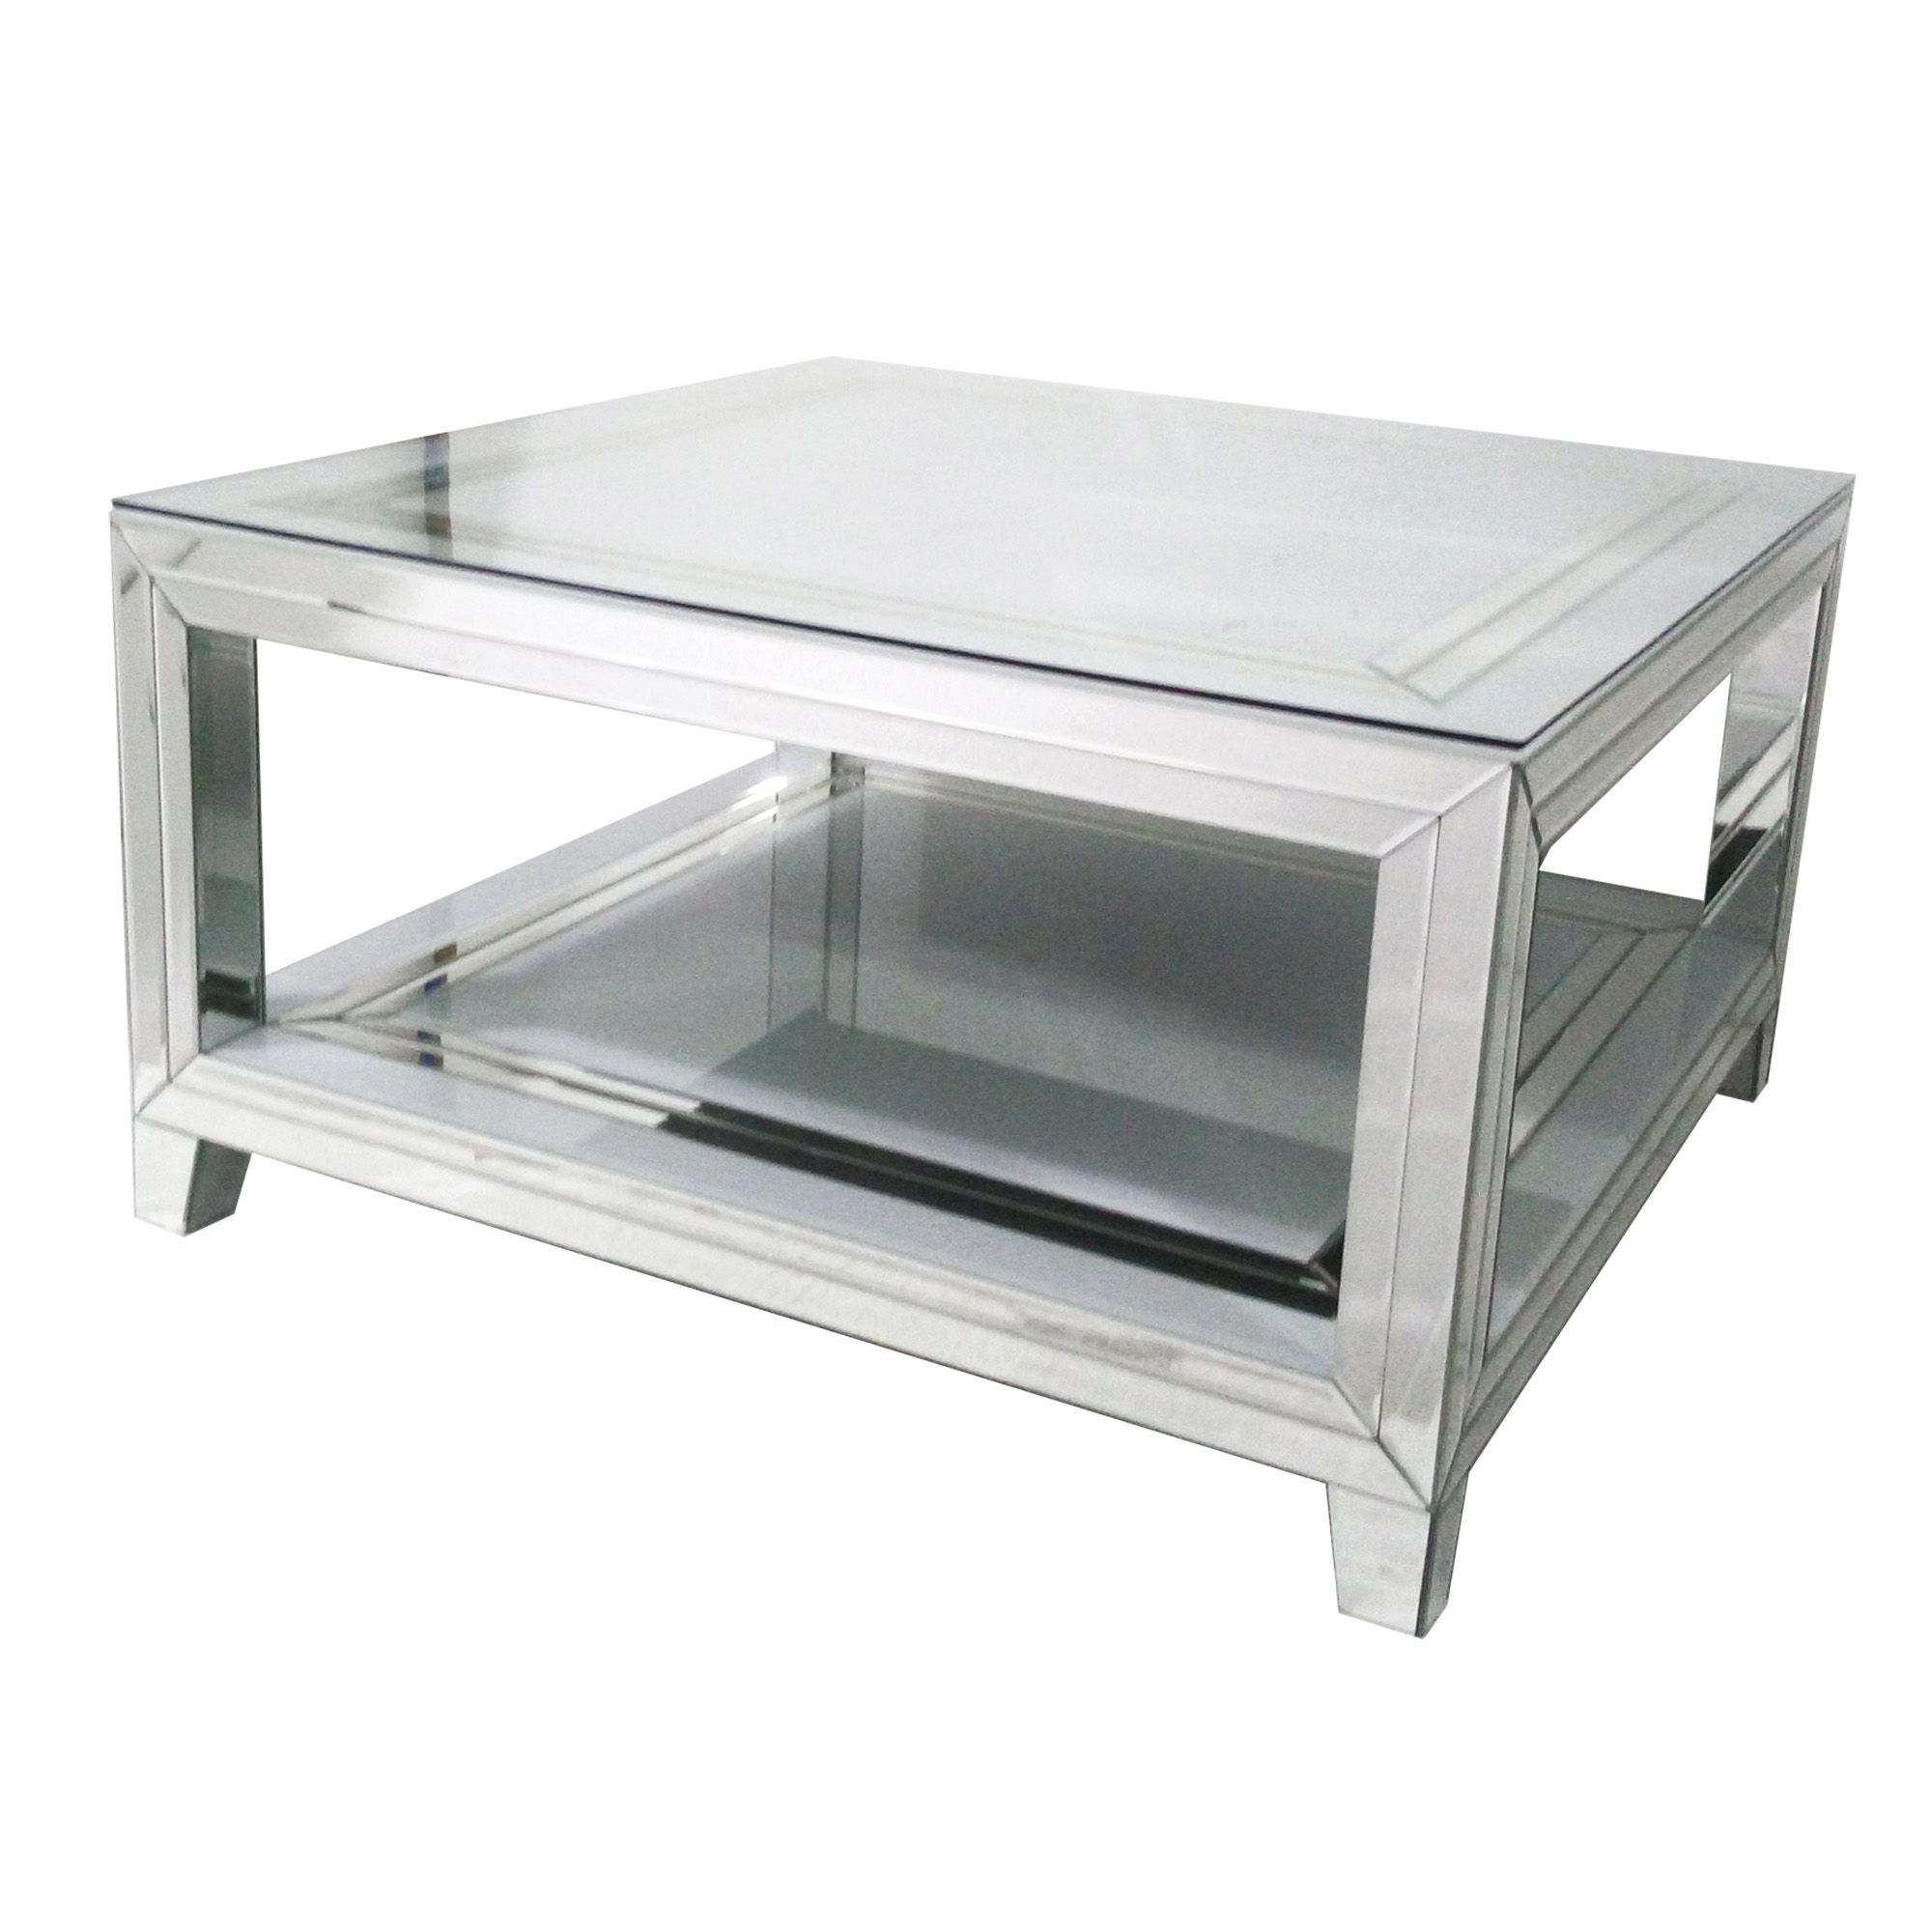 Mirrored Furniture For Widely Used Mirrored Modern Coffee Tables (Gallery 12 of 20)